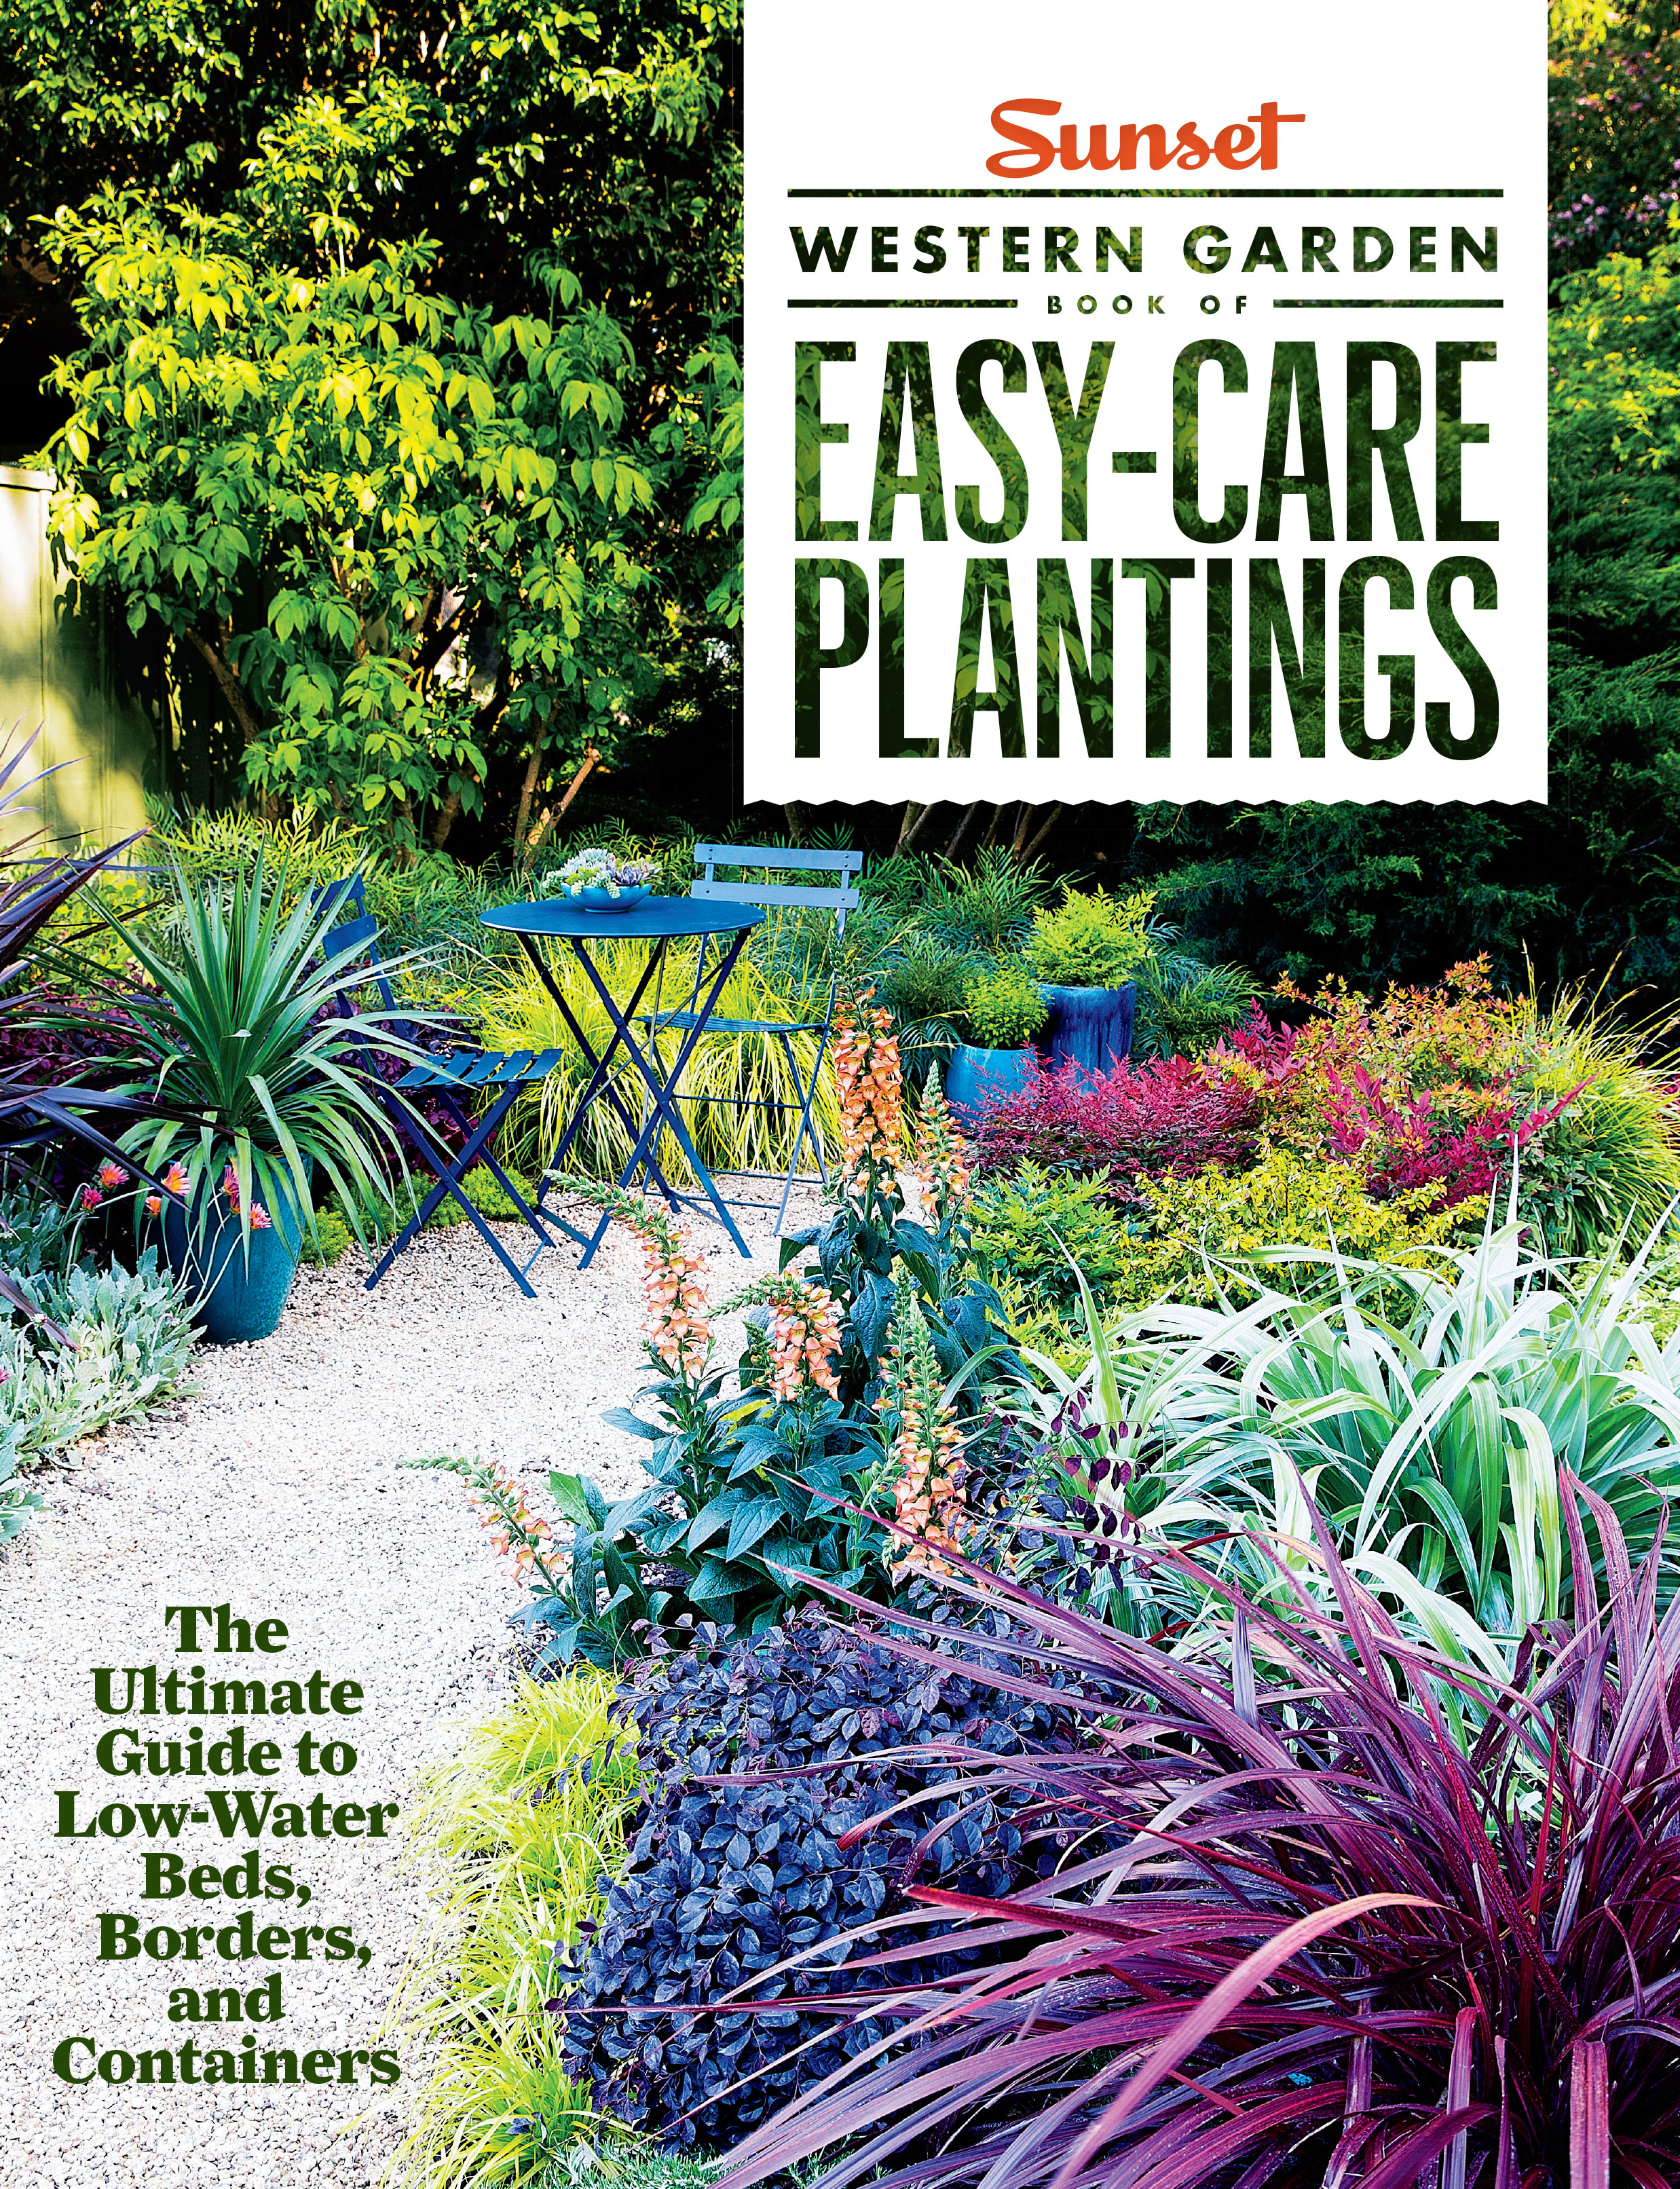 Sunset Easy Care publication with Growsgreen